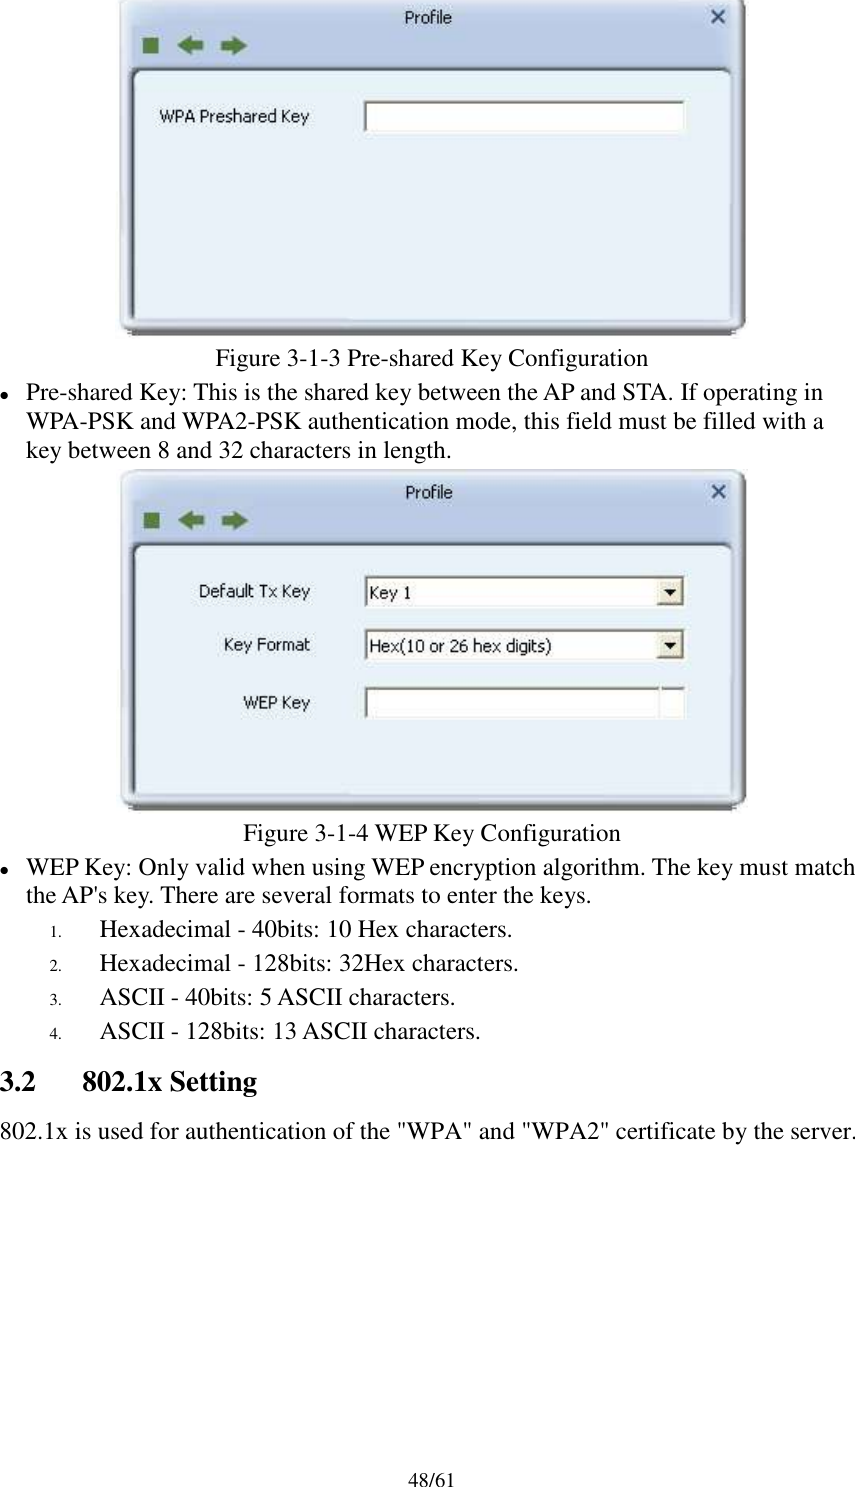 48/61Figure 3-1-3 Pre-shared Key ConfigurationPre-shared Key: This is the shared key between the AP and STA. If operating inWPA-PSK and WPA2-PSK authentication mode, this field must be filled with akey between 8 and 32 characters in length.Figure 3-1-4 WEP Key ConfigurationWEP Key: Only valid when using WEP encryption algorithm. The key must matchthe AP&apos;s key. There are several formats to enter the keys.1. Hexadecimal - 40bits: 10 Hex characters.2. Hexadecimal - 128bits: 32Hex characters.3. ASCII - 40bits: 5 ASCII characters.4. ASCII - 128bits: 13 ASCII characters.3.2 802.1x Setting802.1x is used for authentication of the &quot;WPA&quot; and &quot;WPA2&quot; certificate by the server.